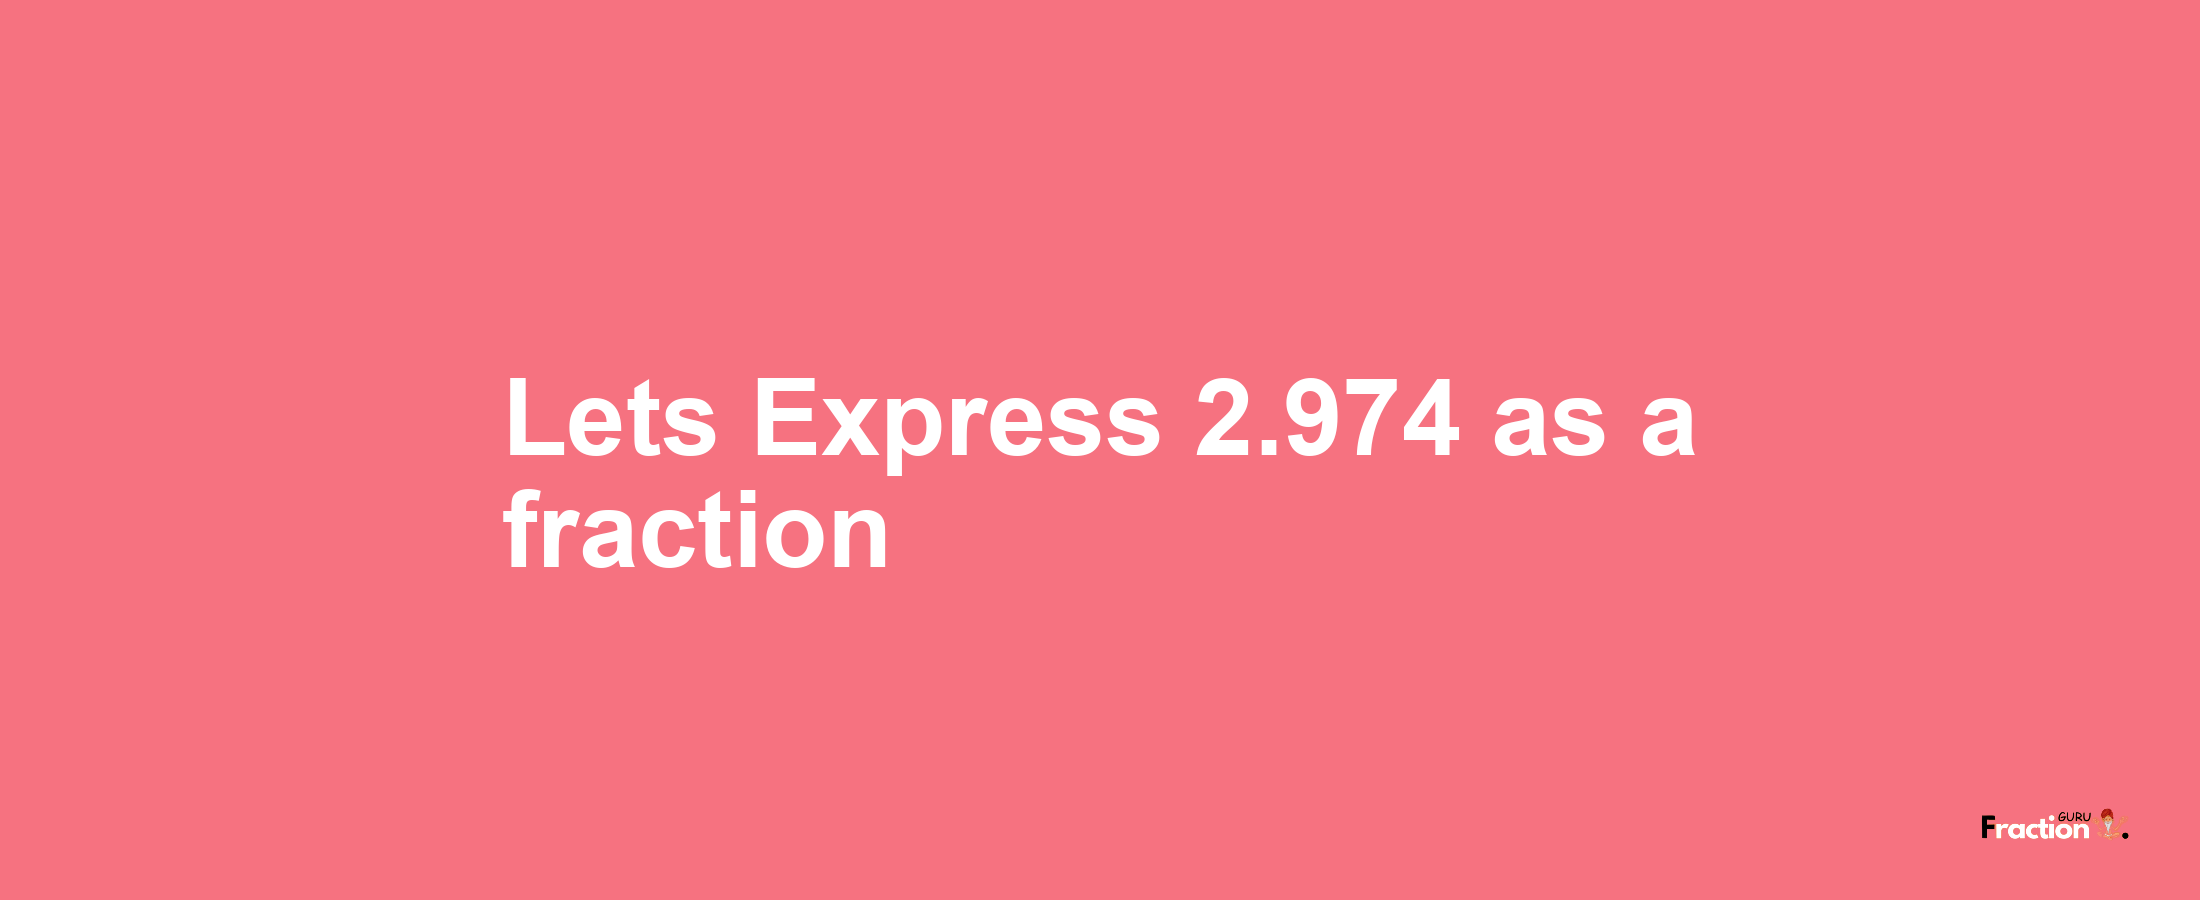 Lets Express 2.974 as afraction